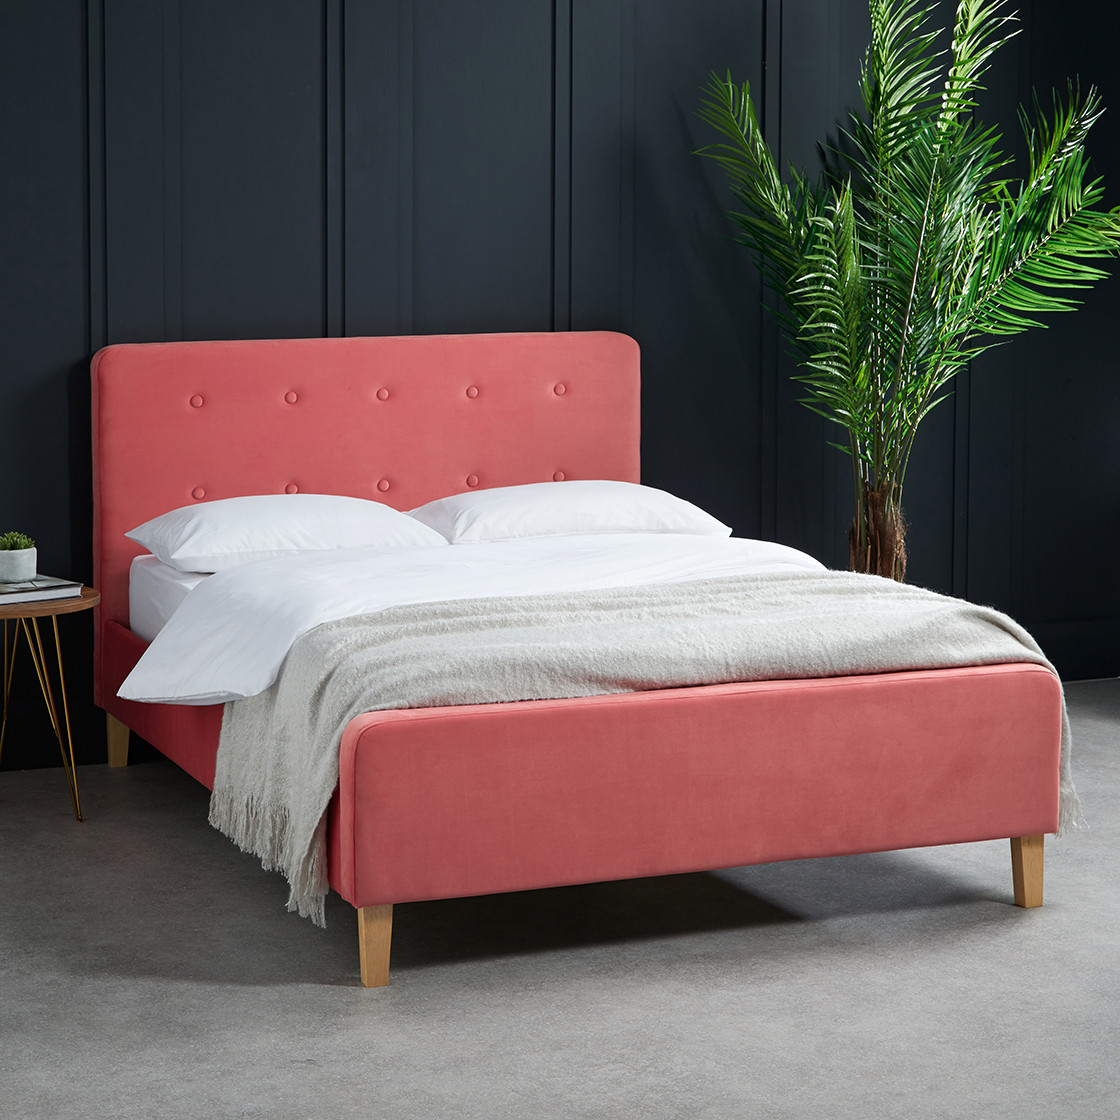 Pierre Coral Double Bed